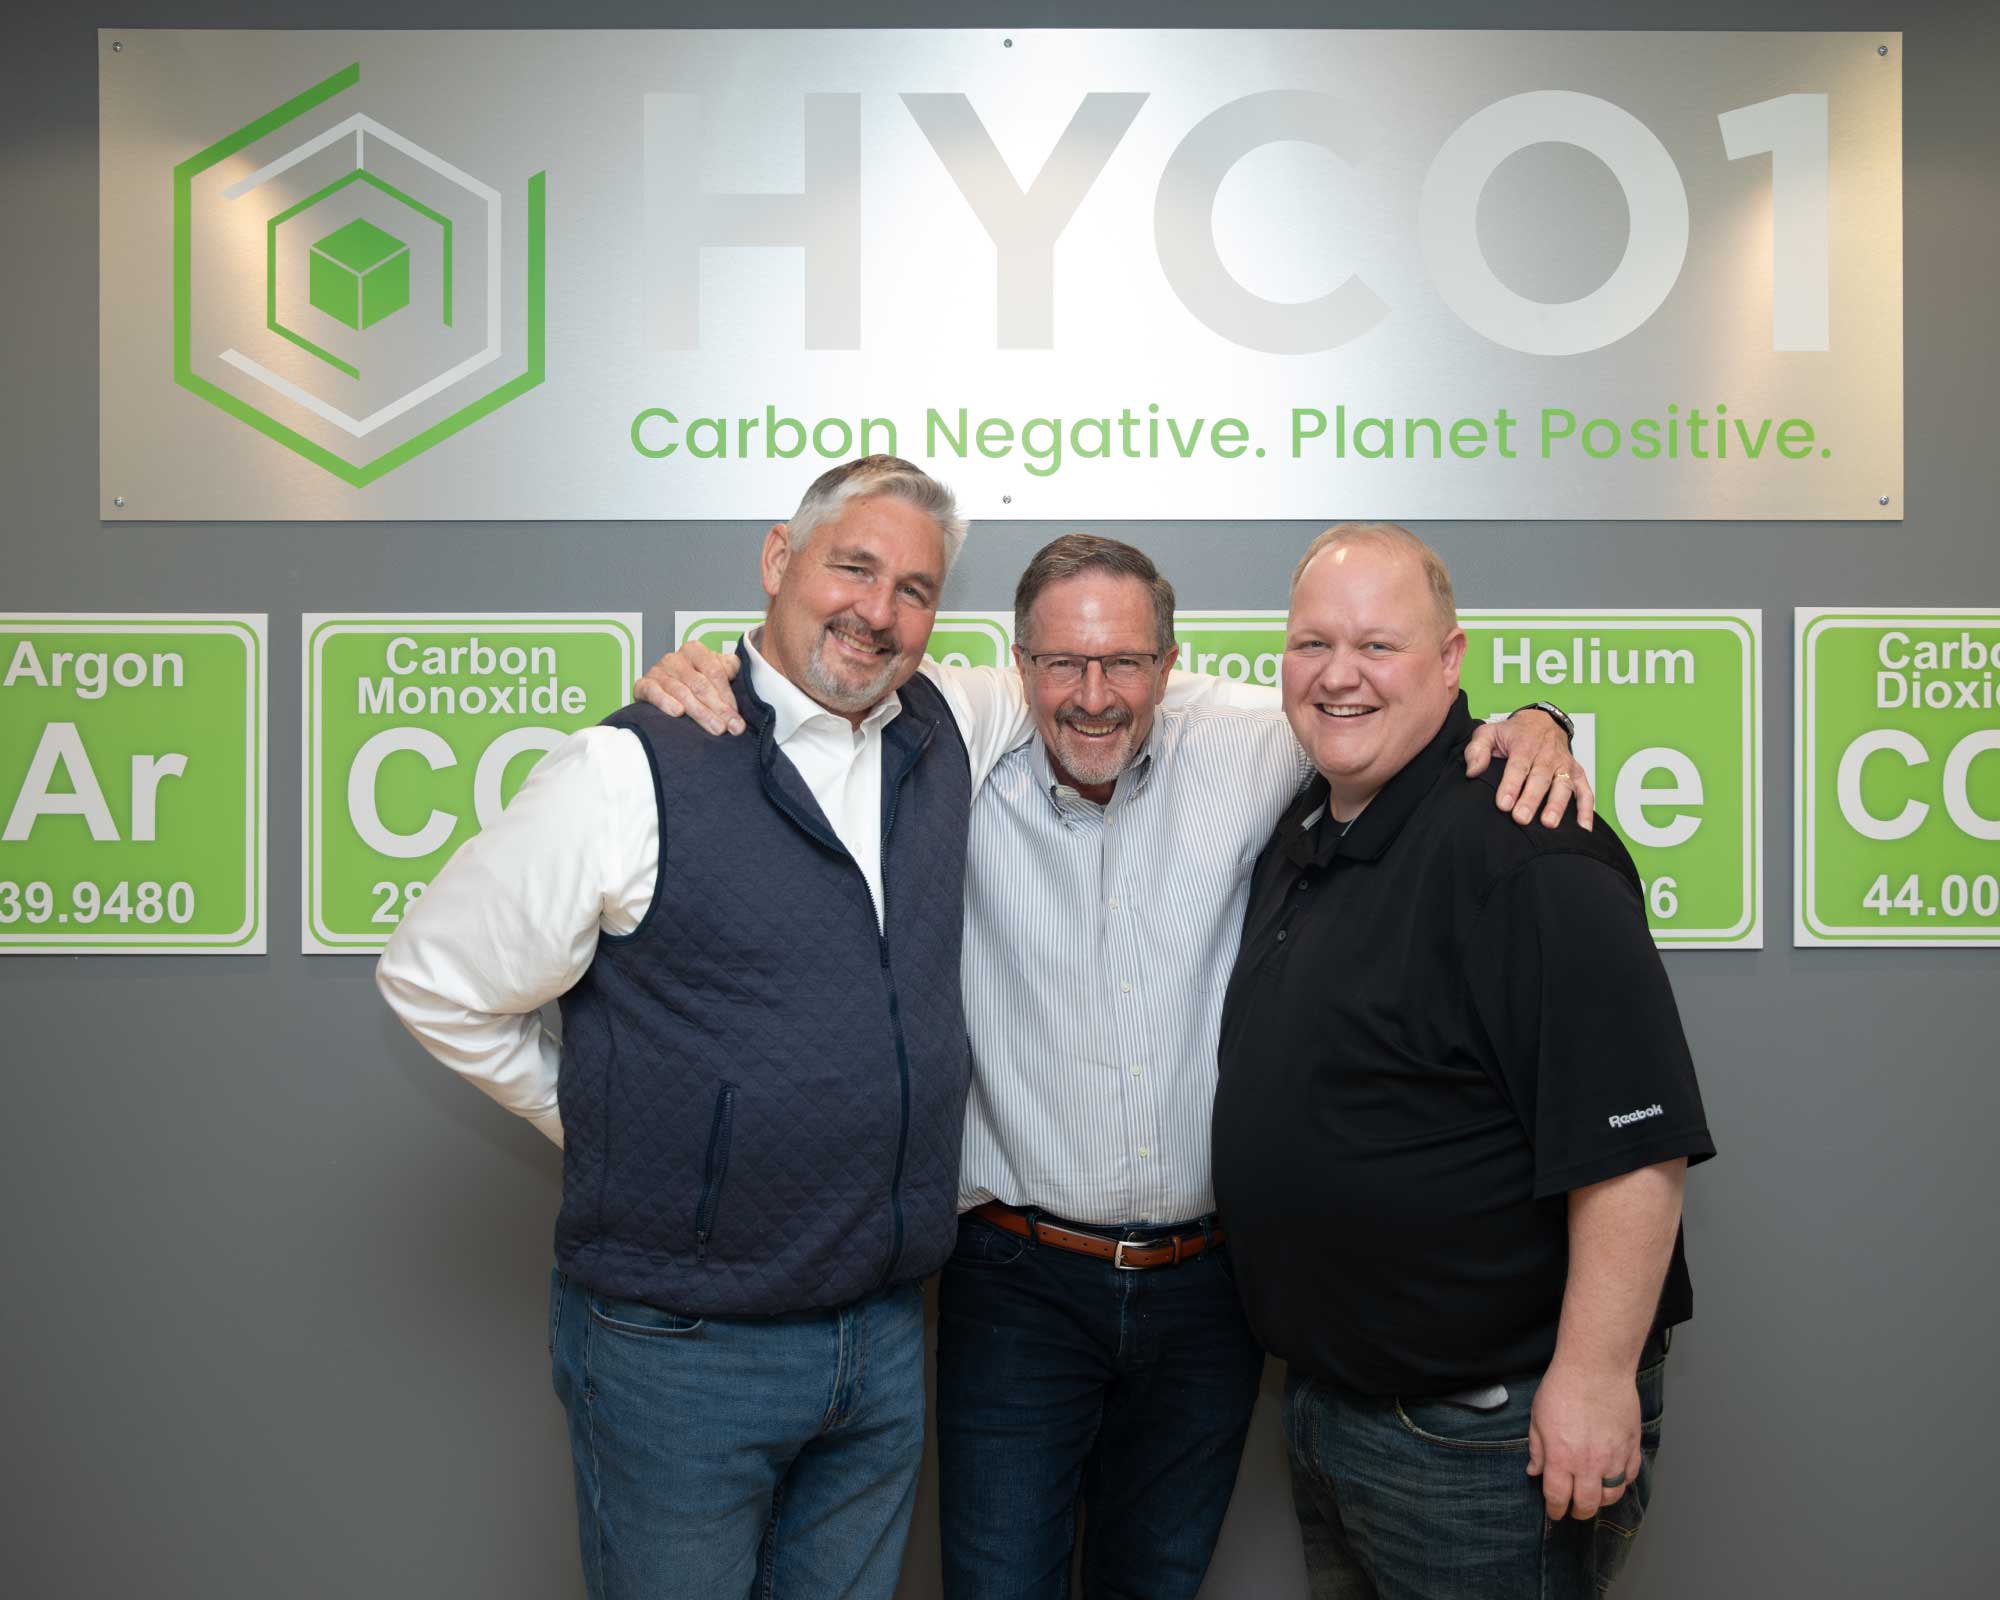 Photo of the three cofounders of HYCO1. Left to right, Jeff Brimhall, Greg Carr, Kurt Dieker